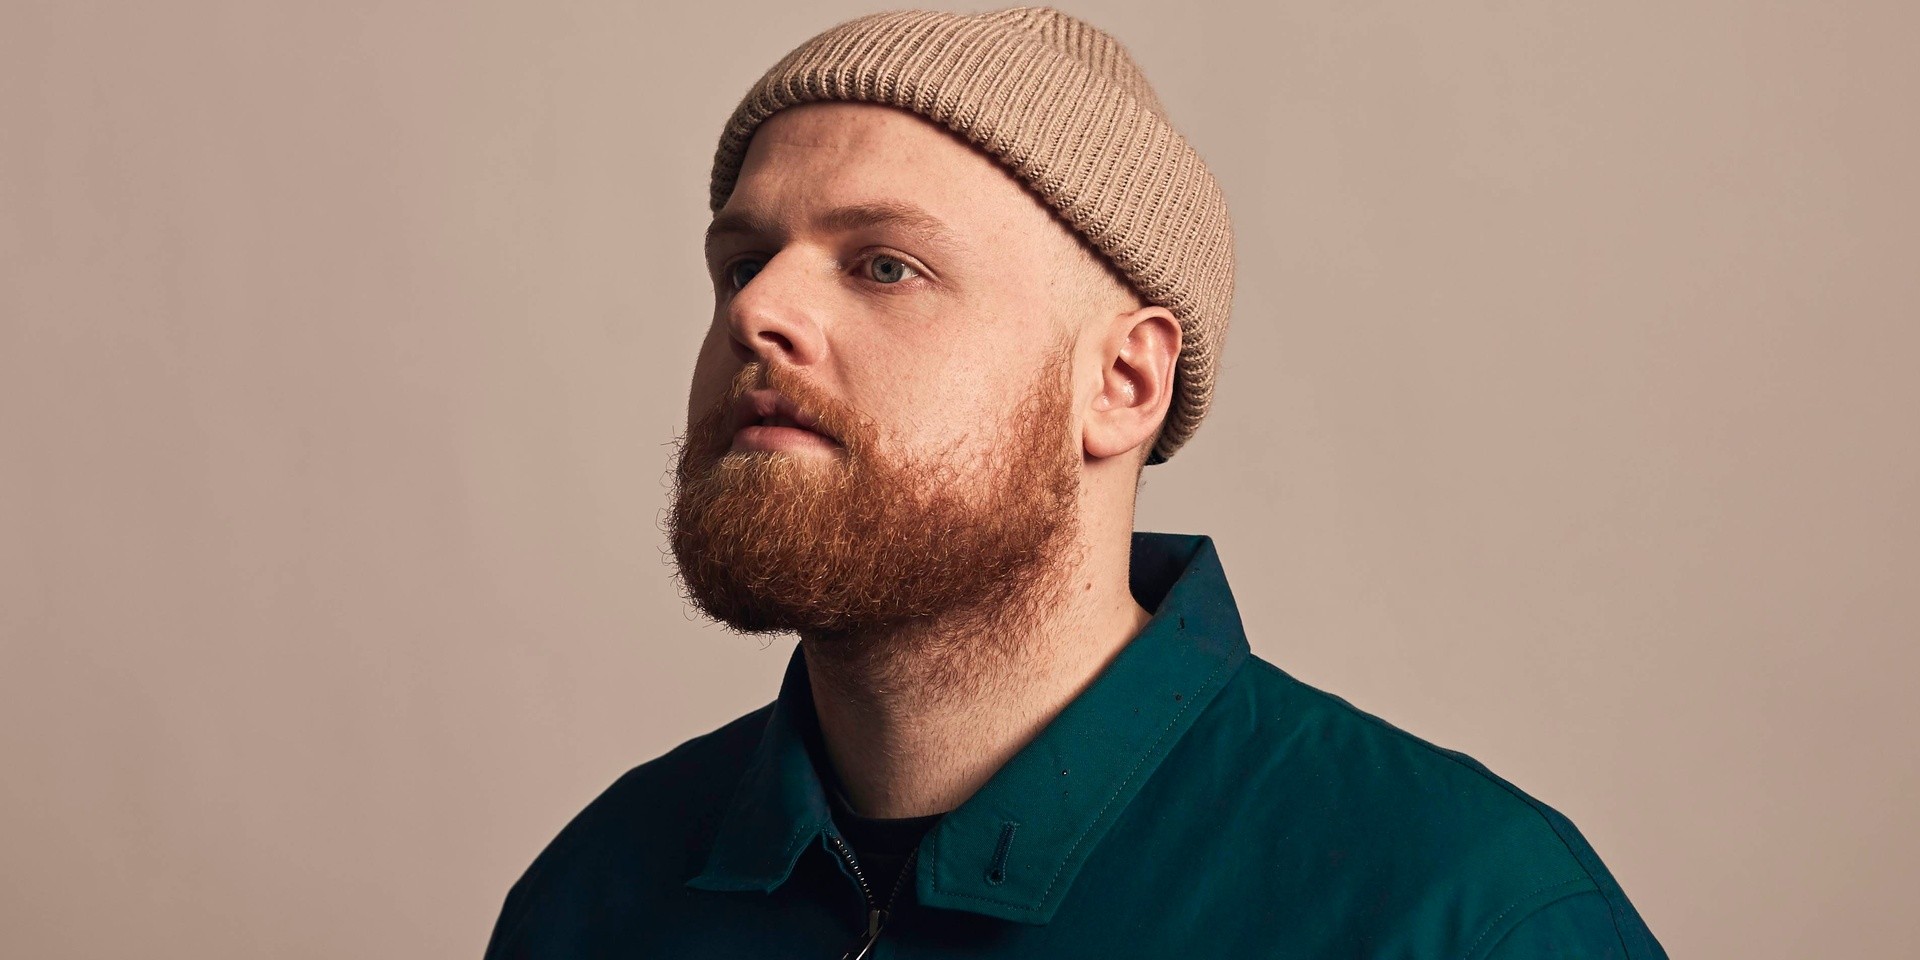 Tom Walker talks about working on his next album, dealing with pressure and more